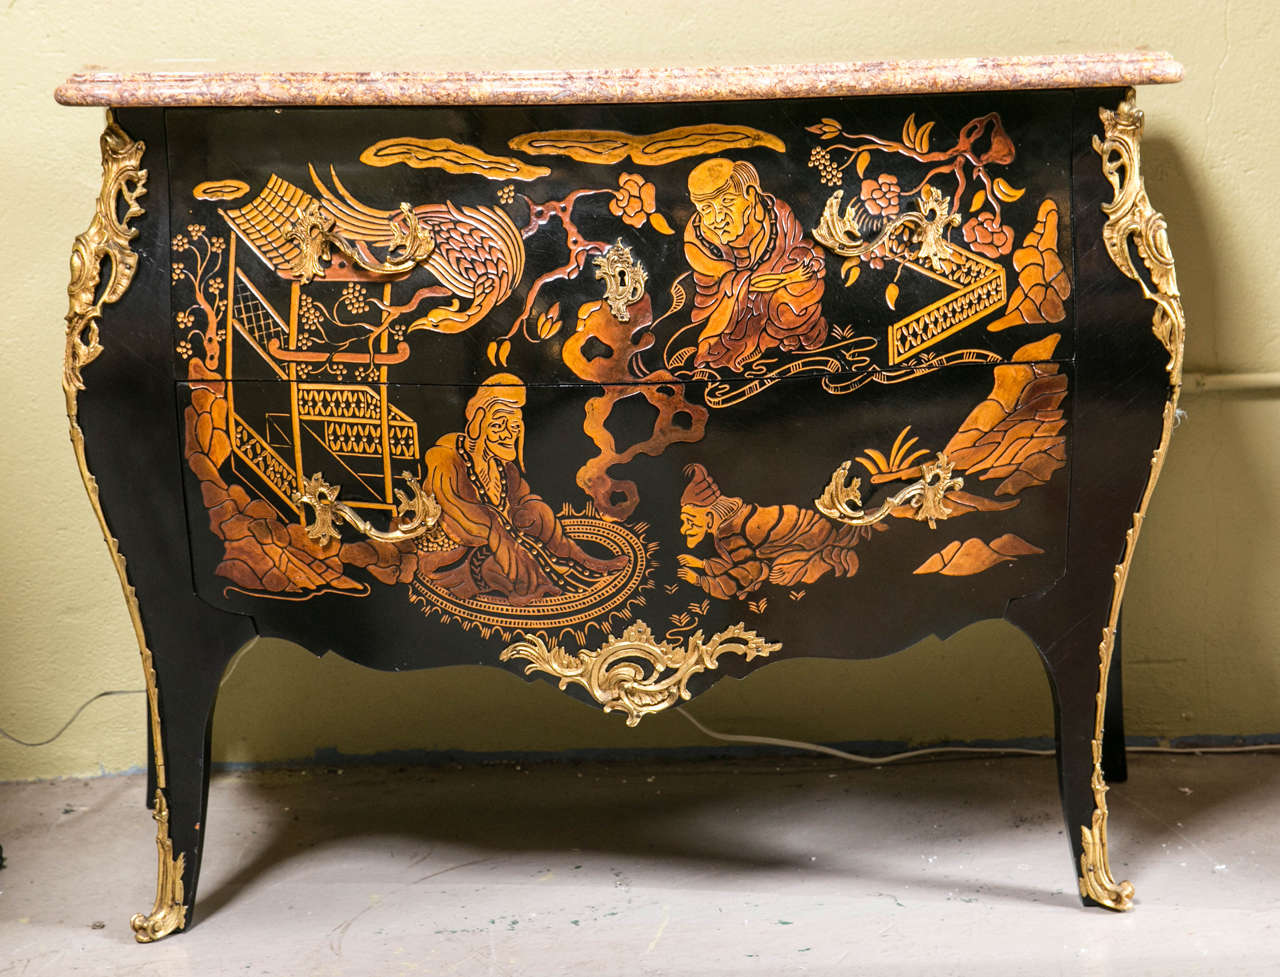 The pair of fine marble-top chinoiserie bronze-mounted commodes possibly by Jansen. Simply the finest pair of marble top commodes you will find. The bronze cast Louis XV style feet having a flowing bronze ornamental mount leading to the cabriole